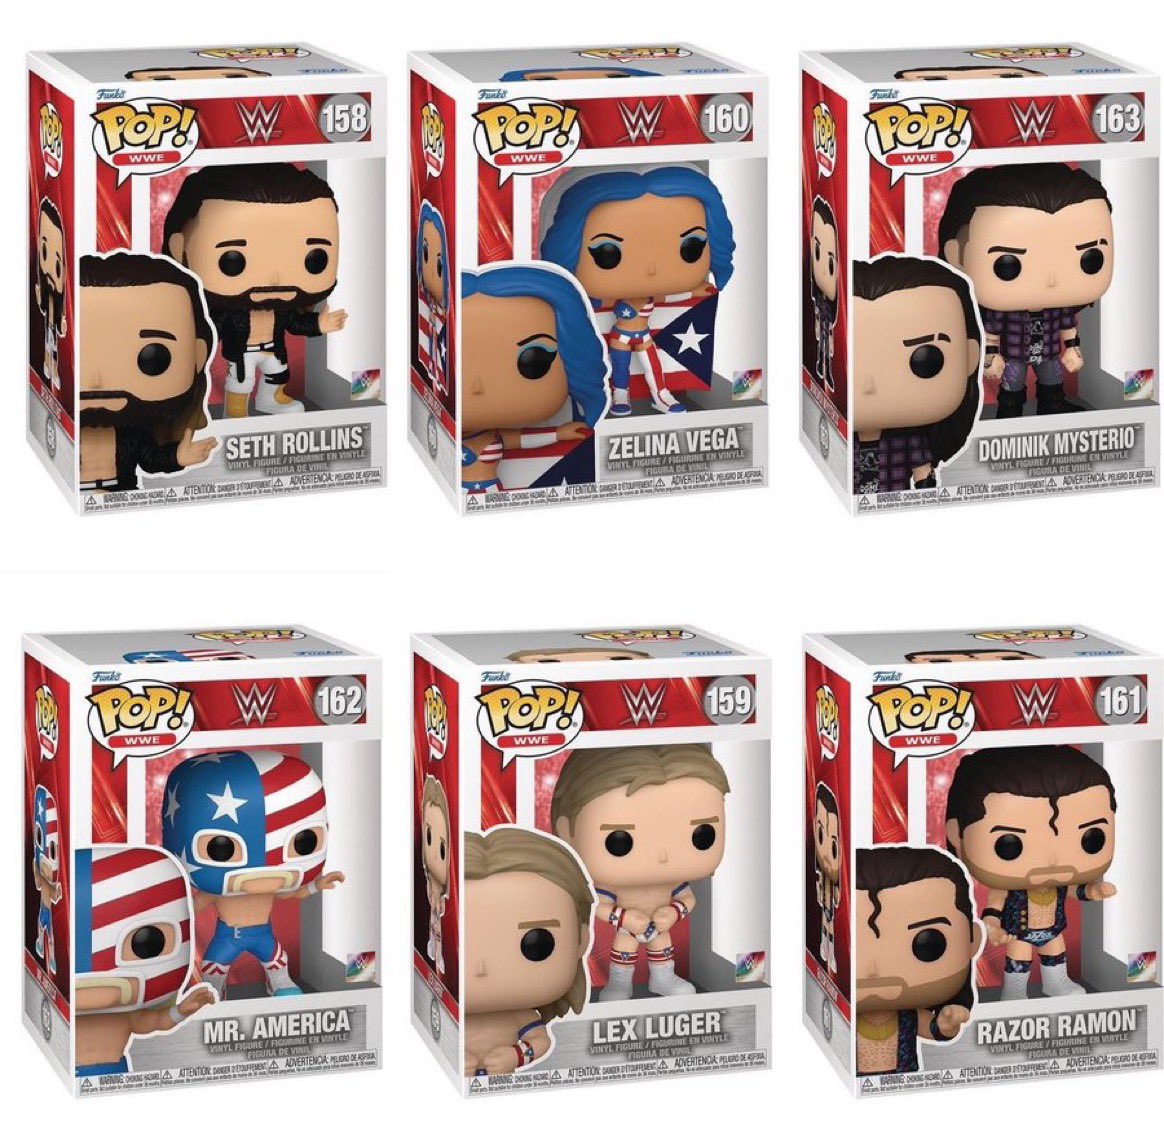 First look at new WWE Pops! 

#funko #wee #sethrollins #funkopop #popvinyl #toys #collectibles 

📷 @funkoinfo_